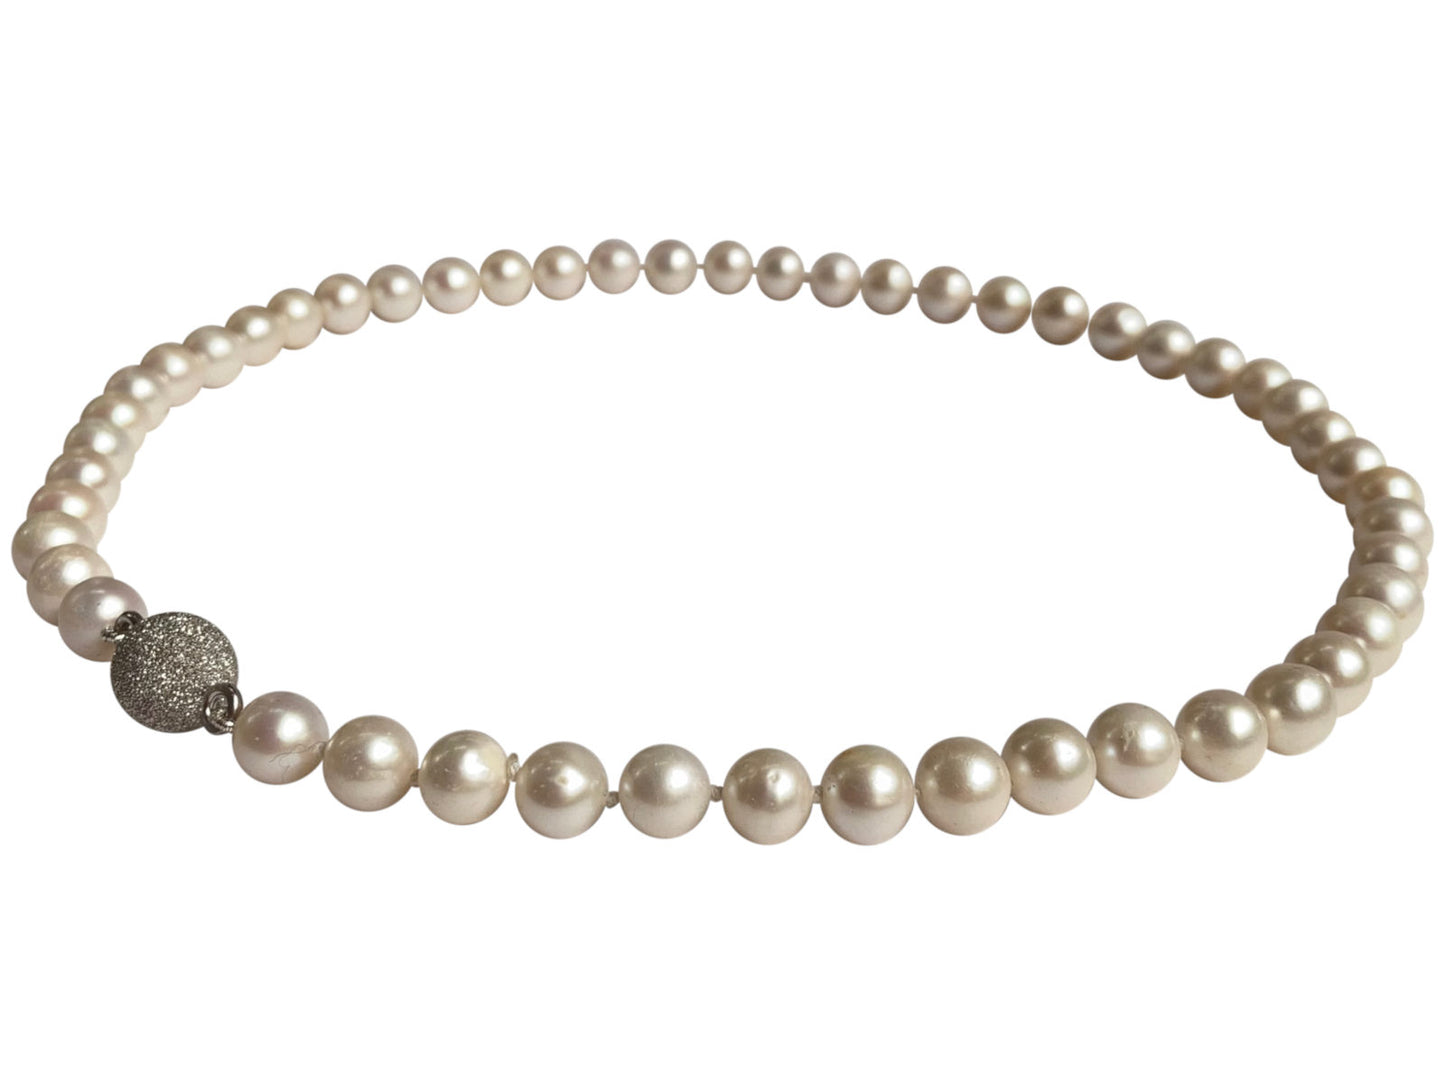 Freshwater Pearl Necklace 8-9mm On Sterling Silver Magnetic Clasp Angled View With Clasp on Side